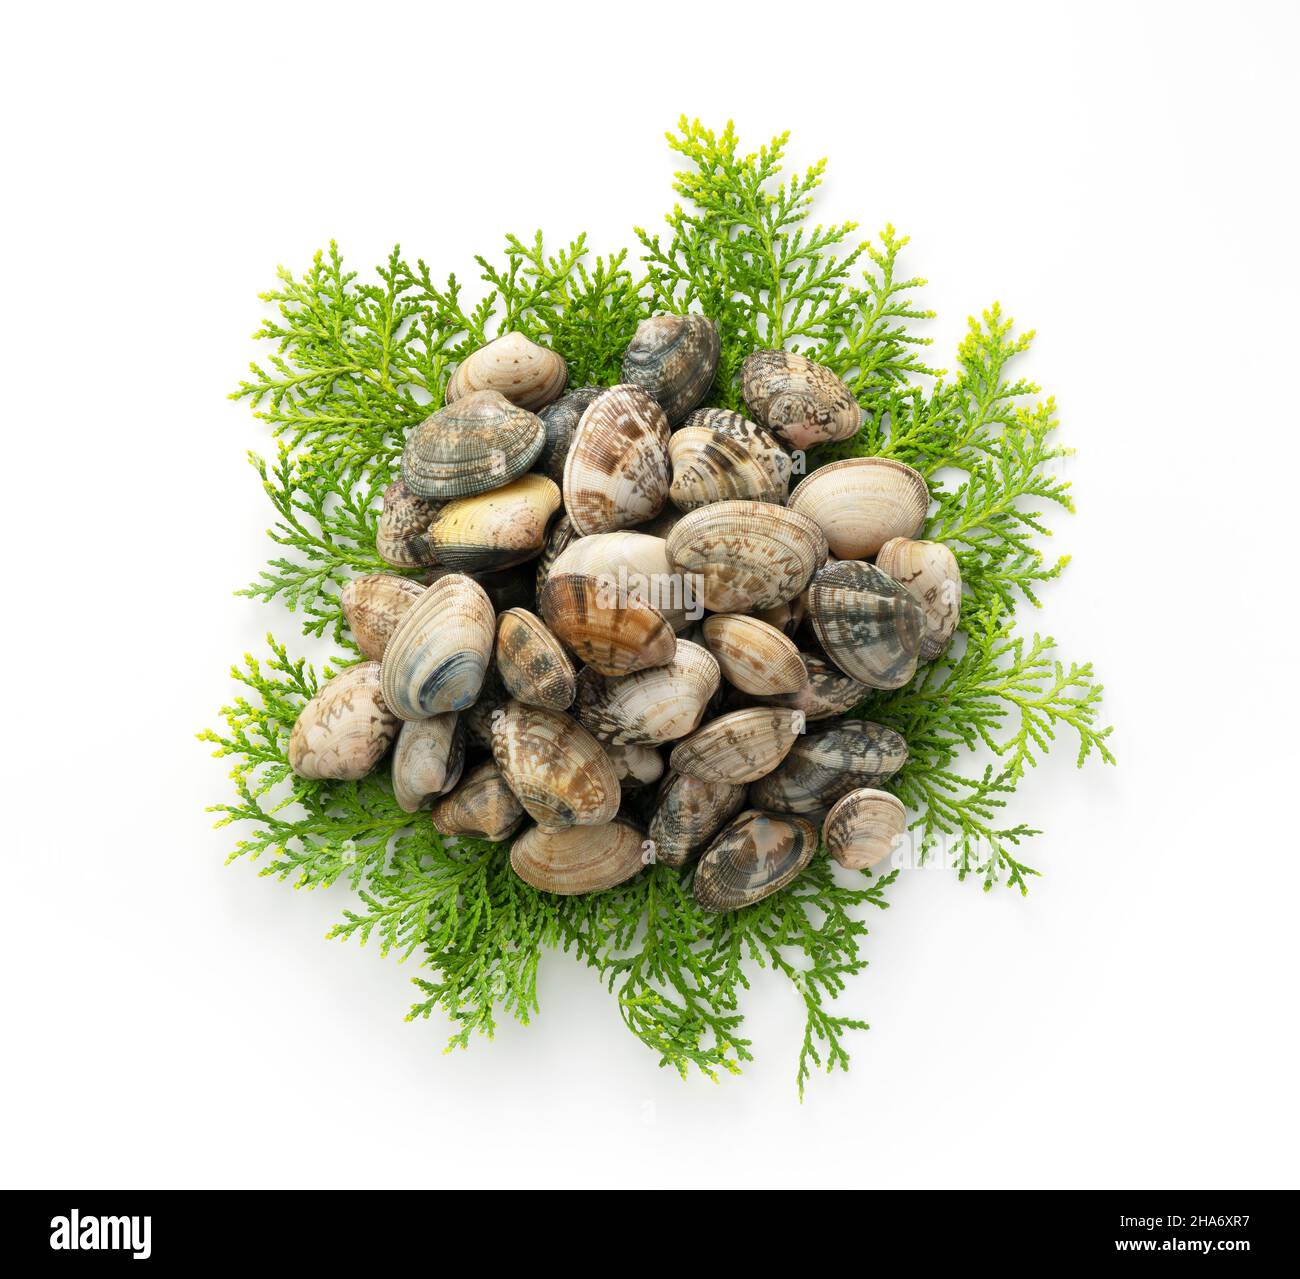 Asari clams on Japanese cypress leaves placed on a white background. View from above Stock Photo